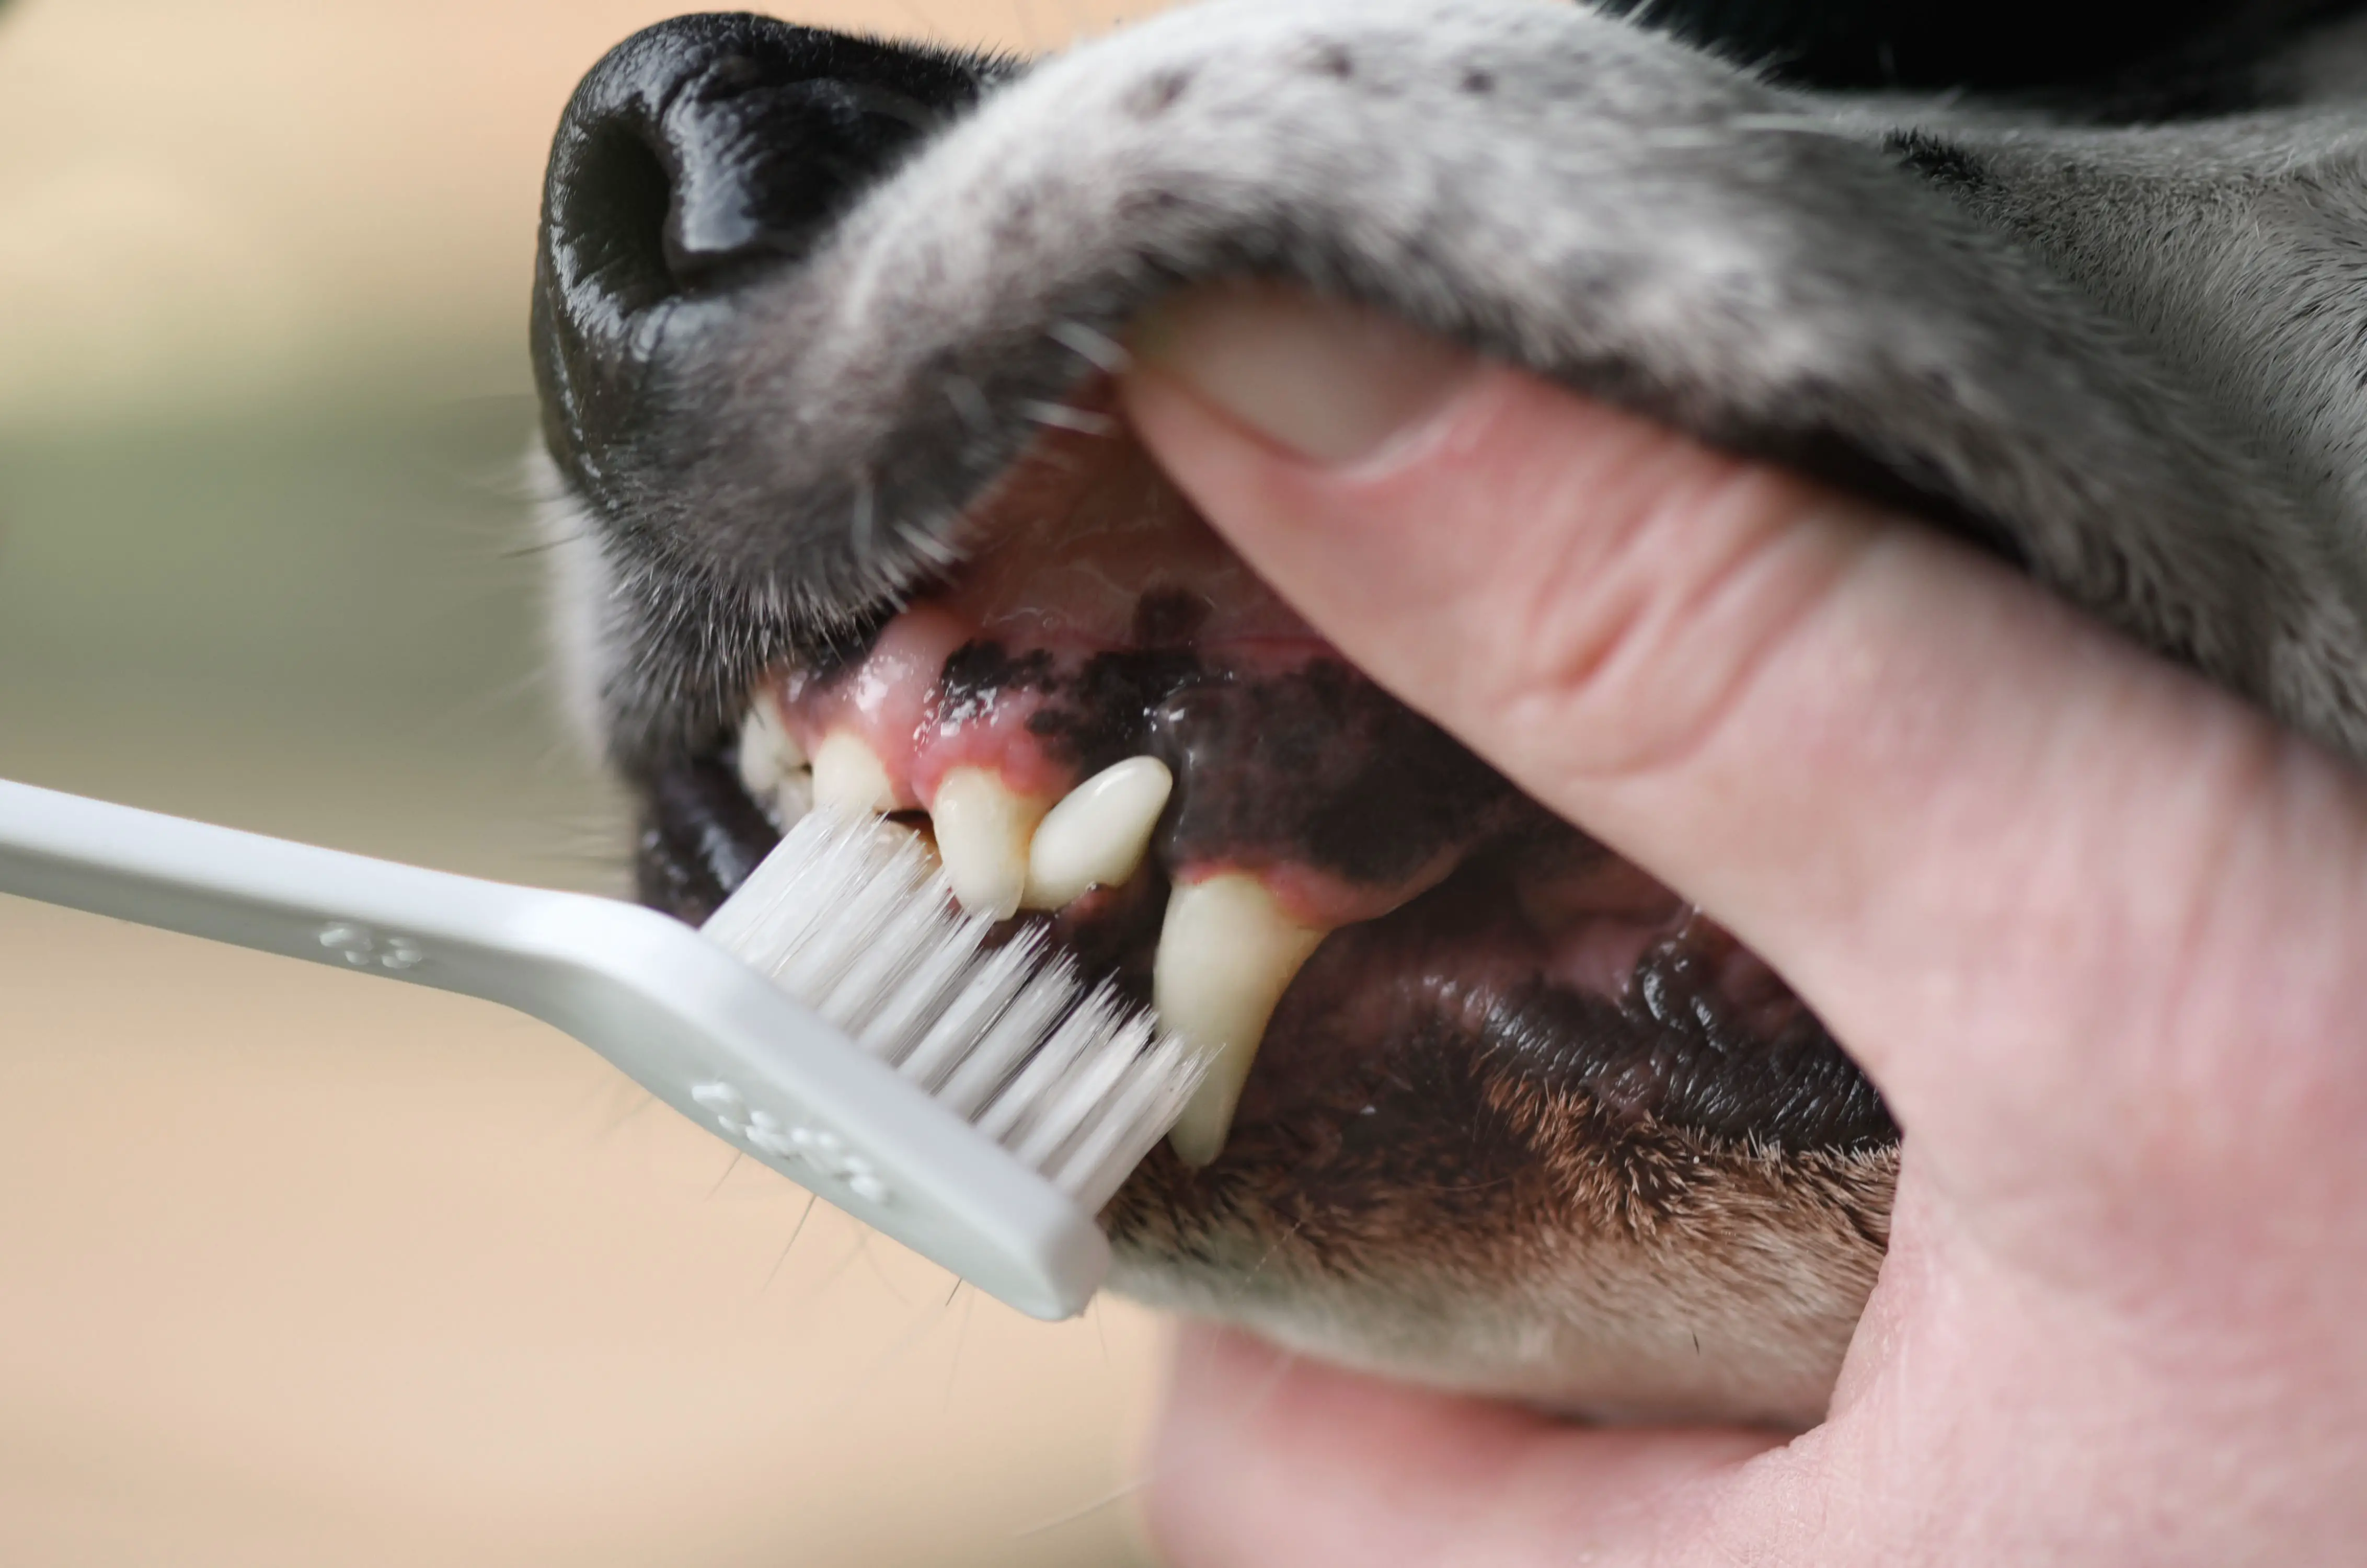 How to Get Rid of Black Gums on Dogs